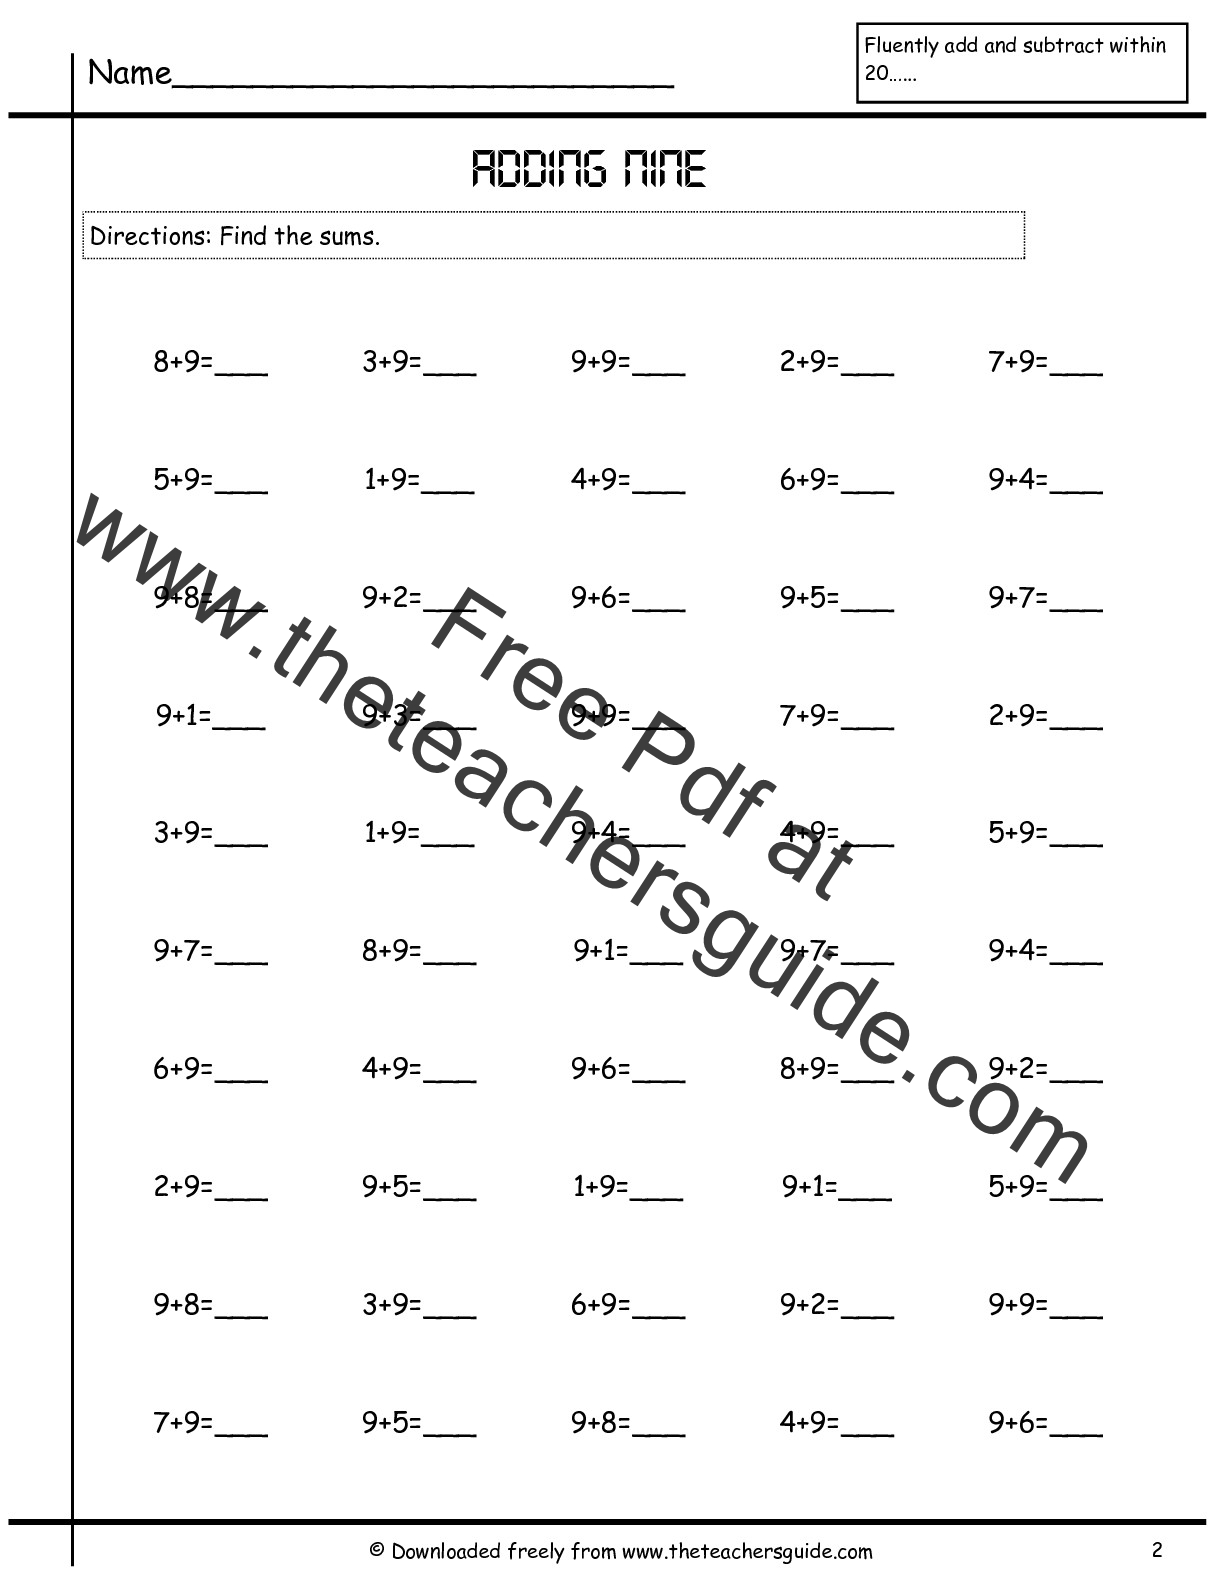 11-best-images-of-addition-worksheets-sums-to-10-addition-with-sums